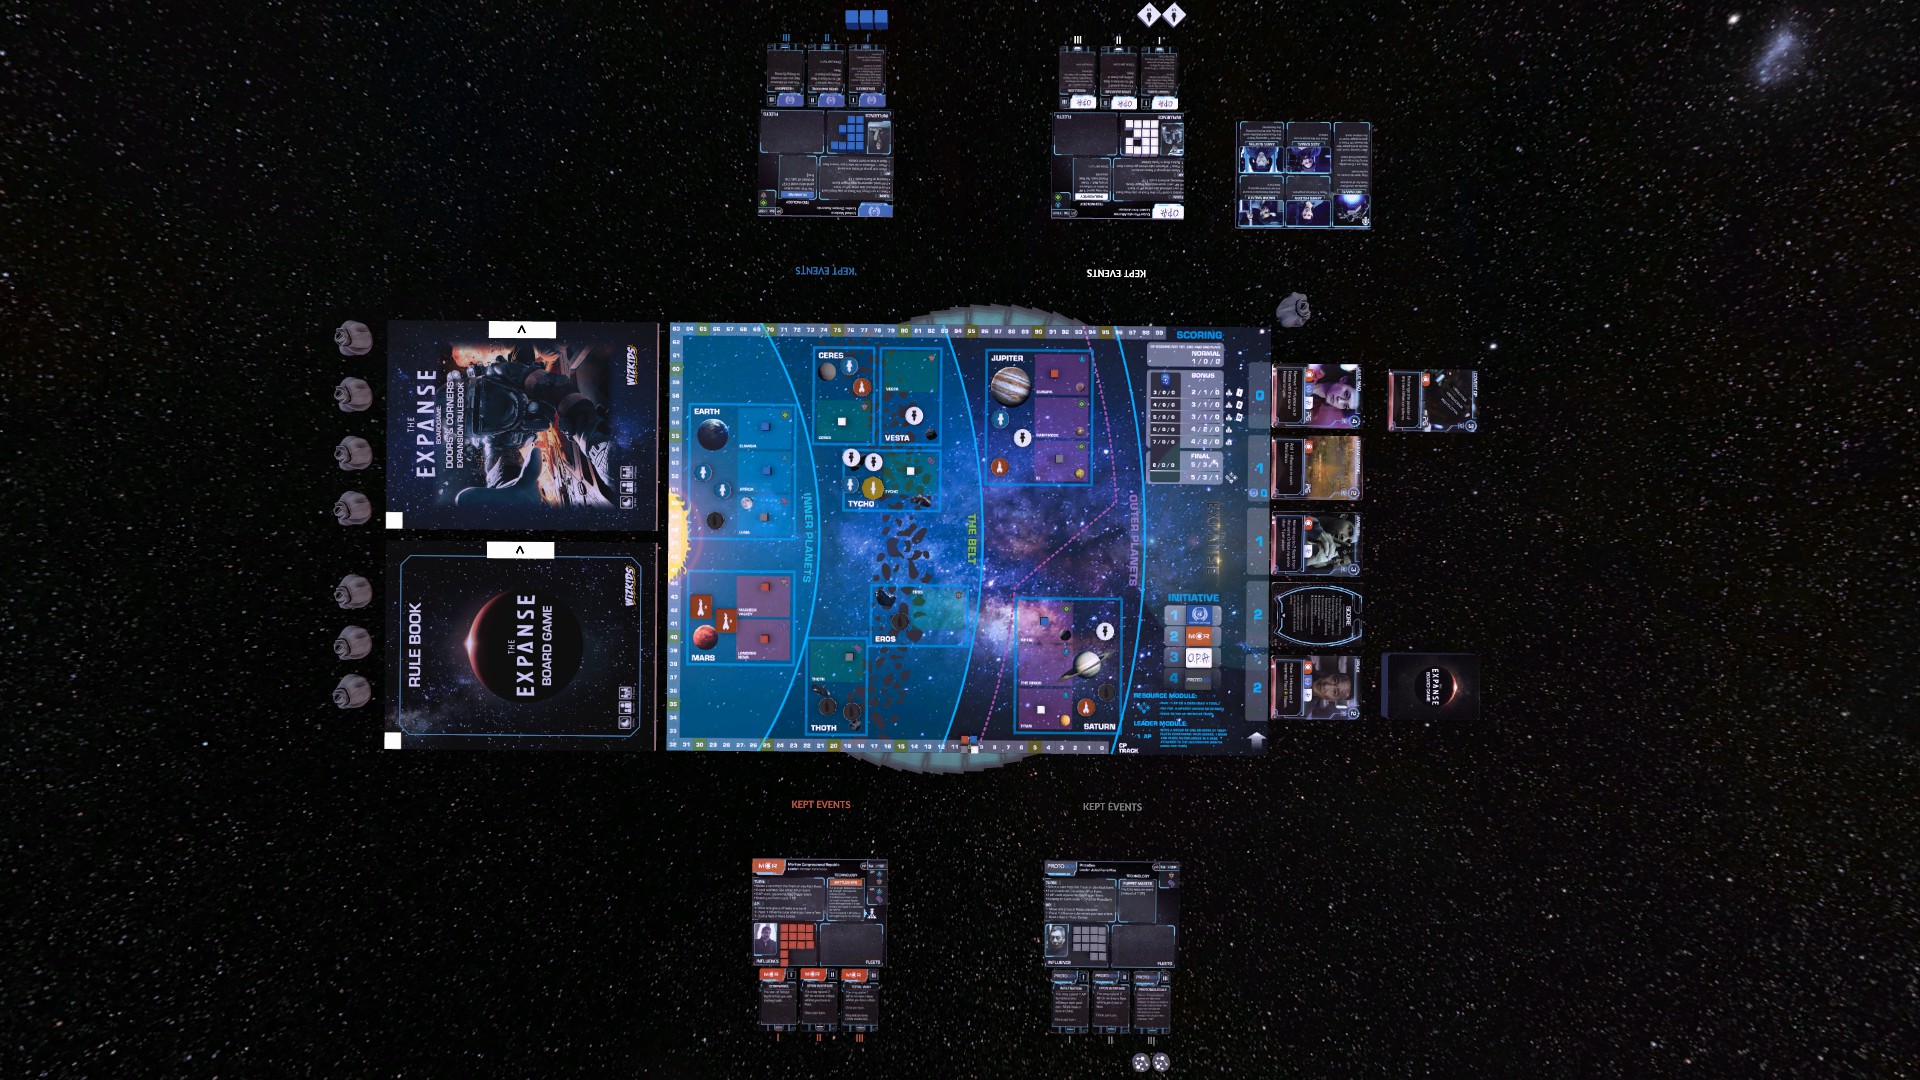 The Expanse Board Game Doors and Corners Expansion